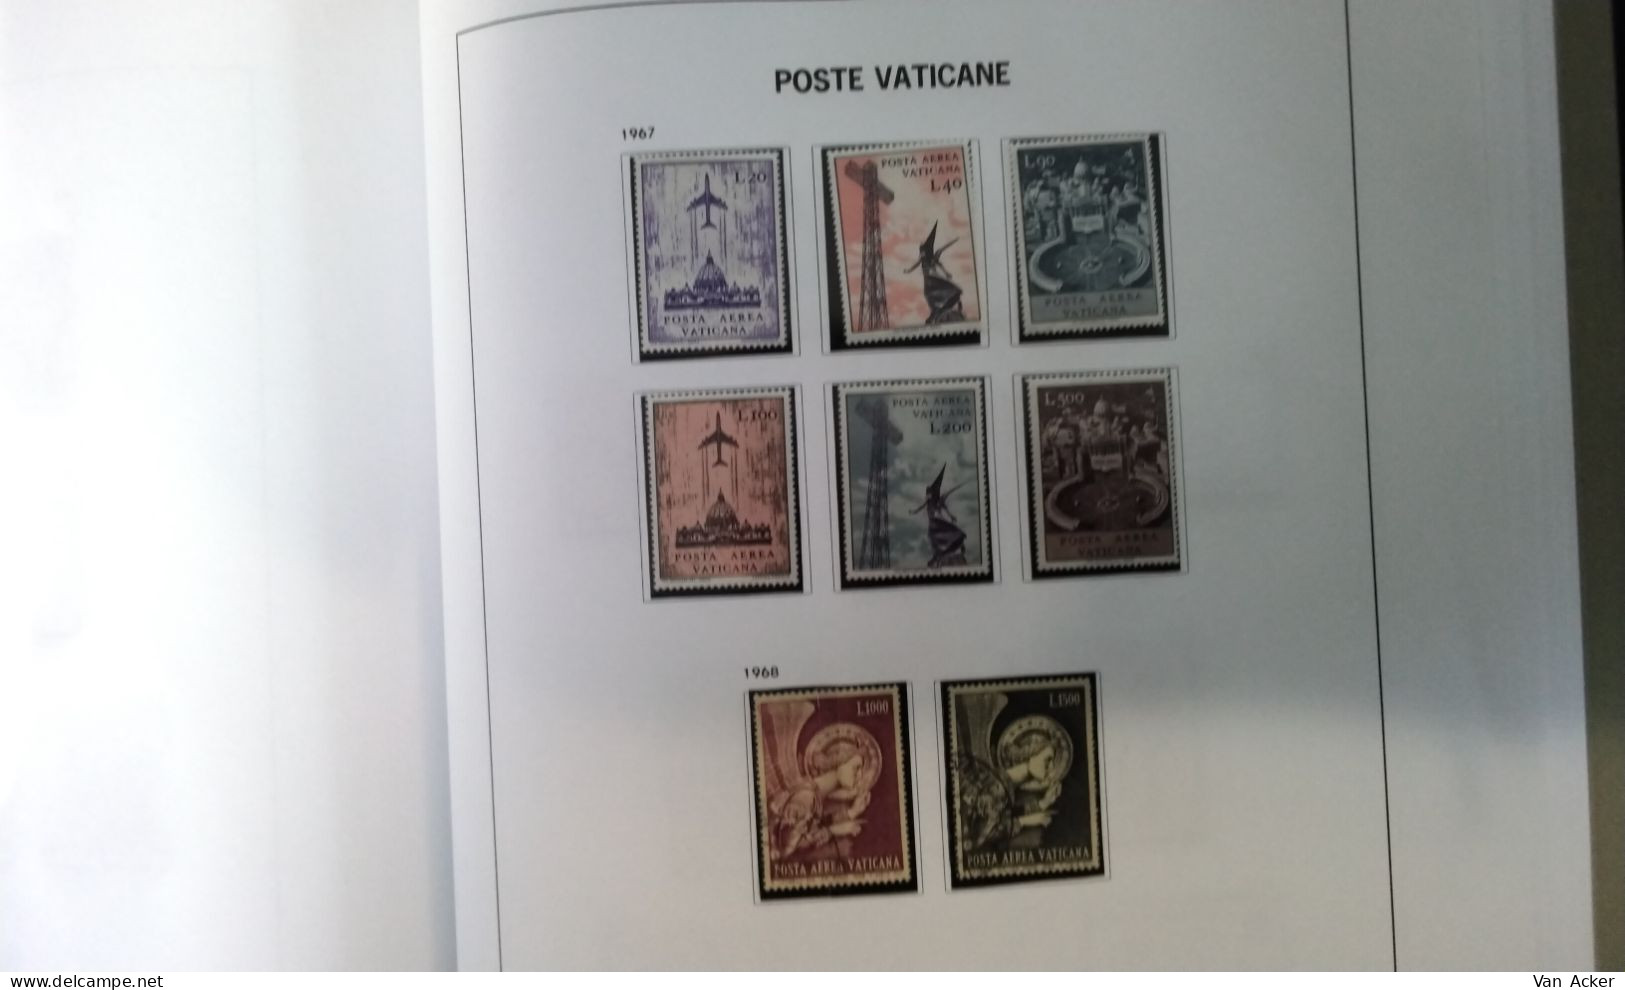 Collection Vatican City **/*/used.